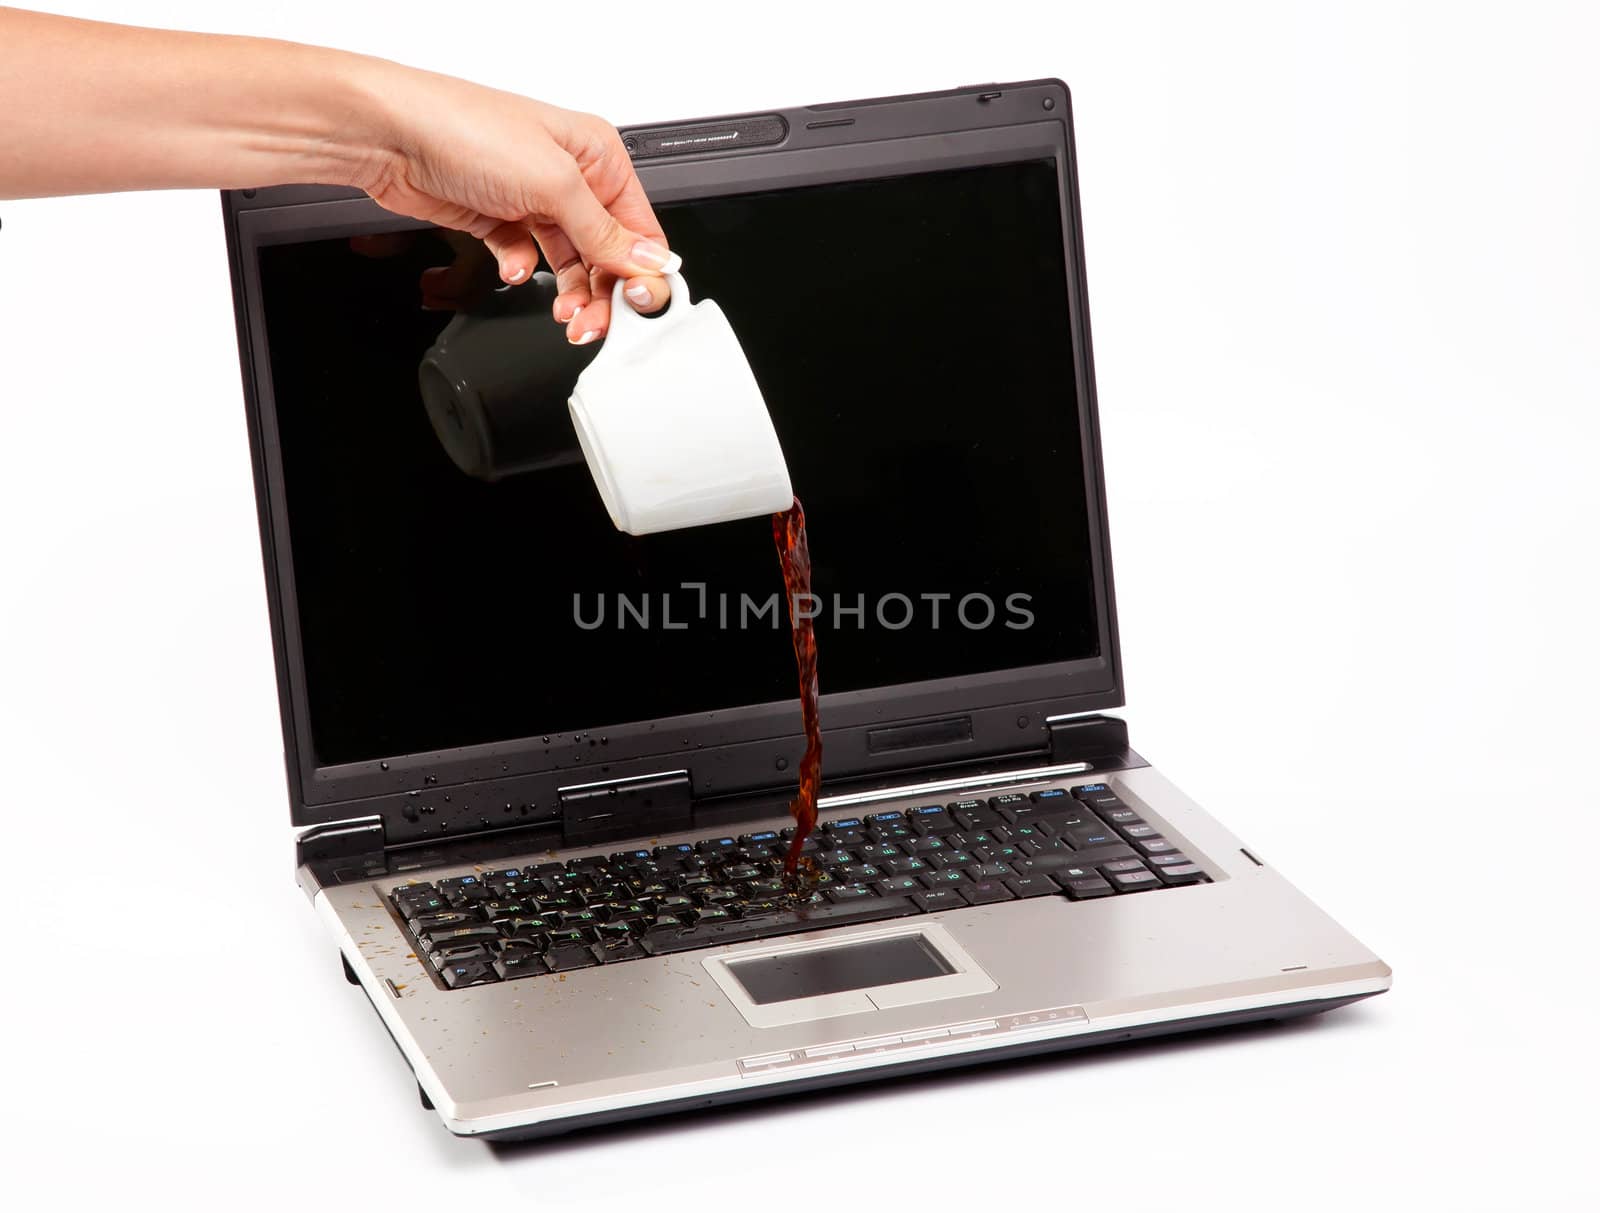 Coffee spilled on laptop keyboard by RawGroup